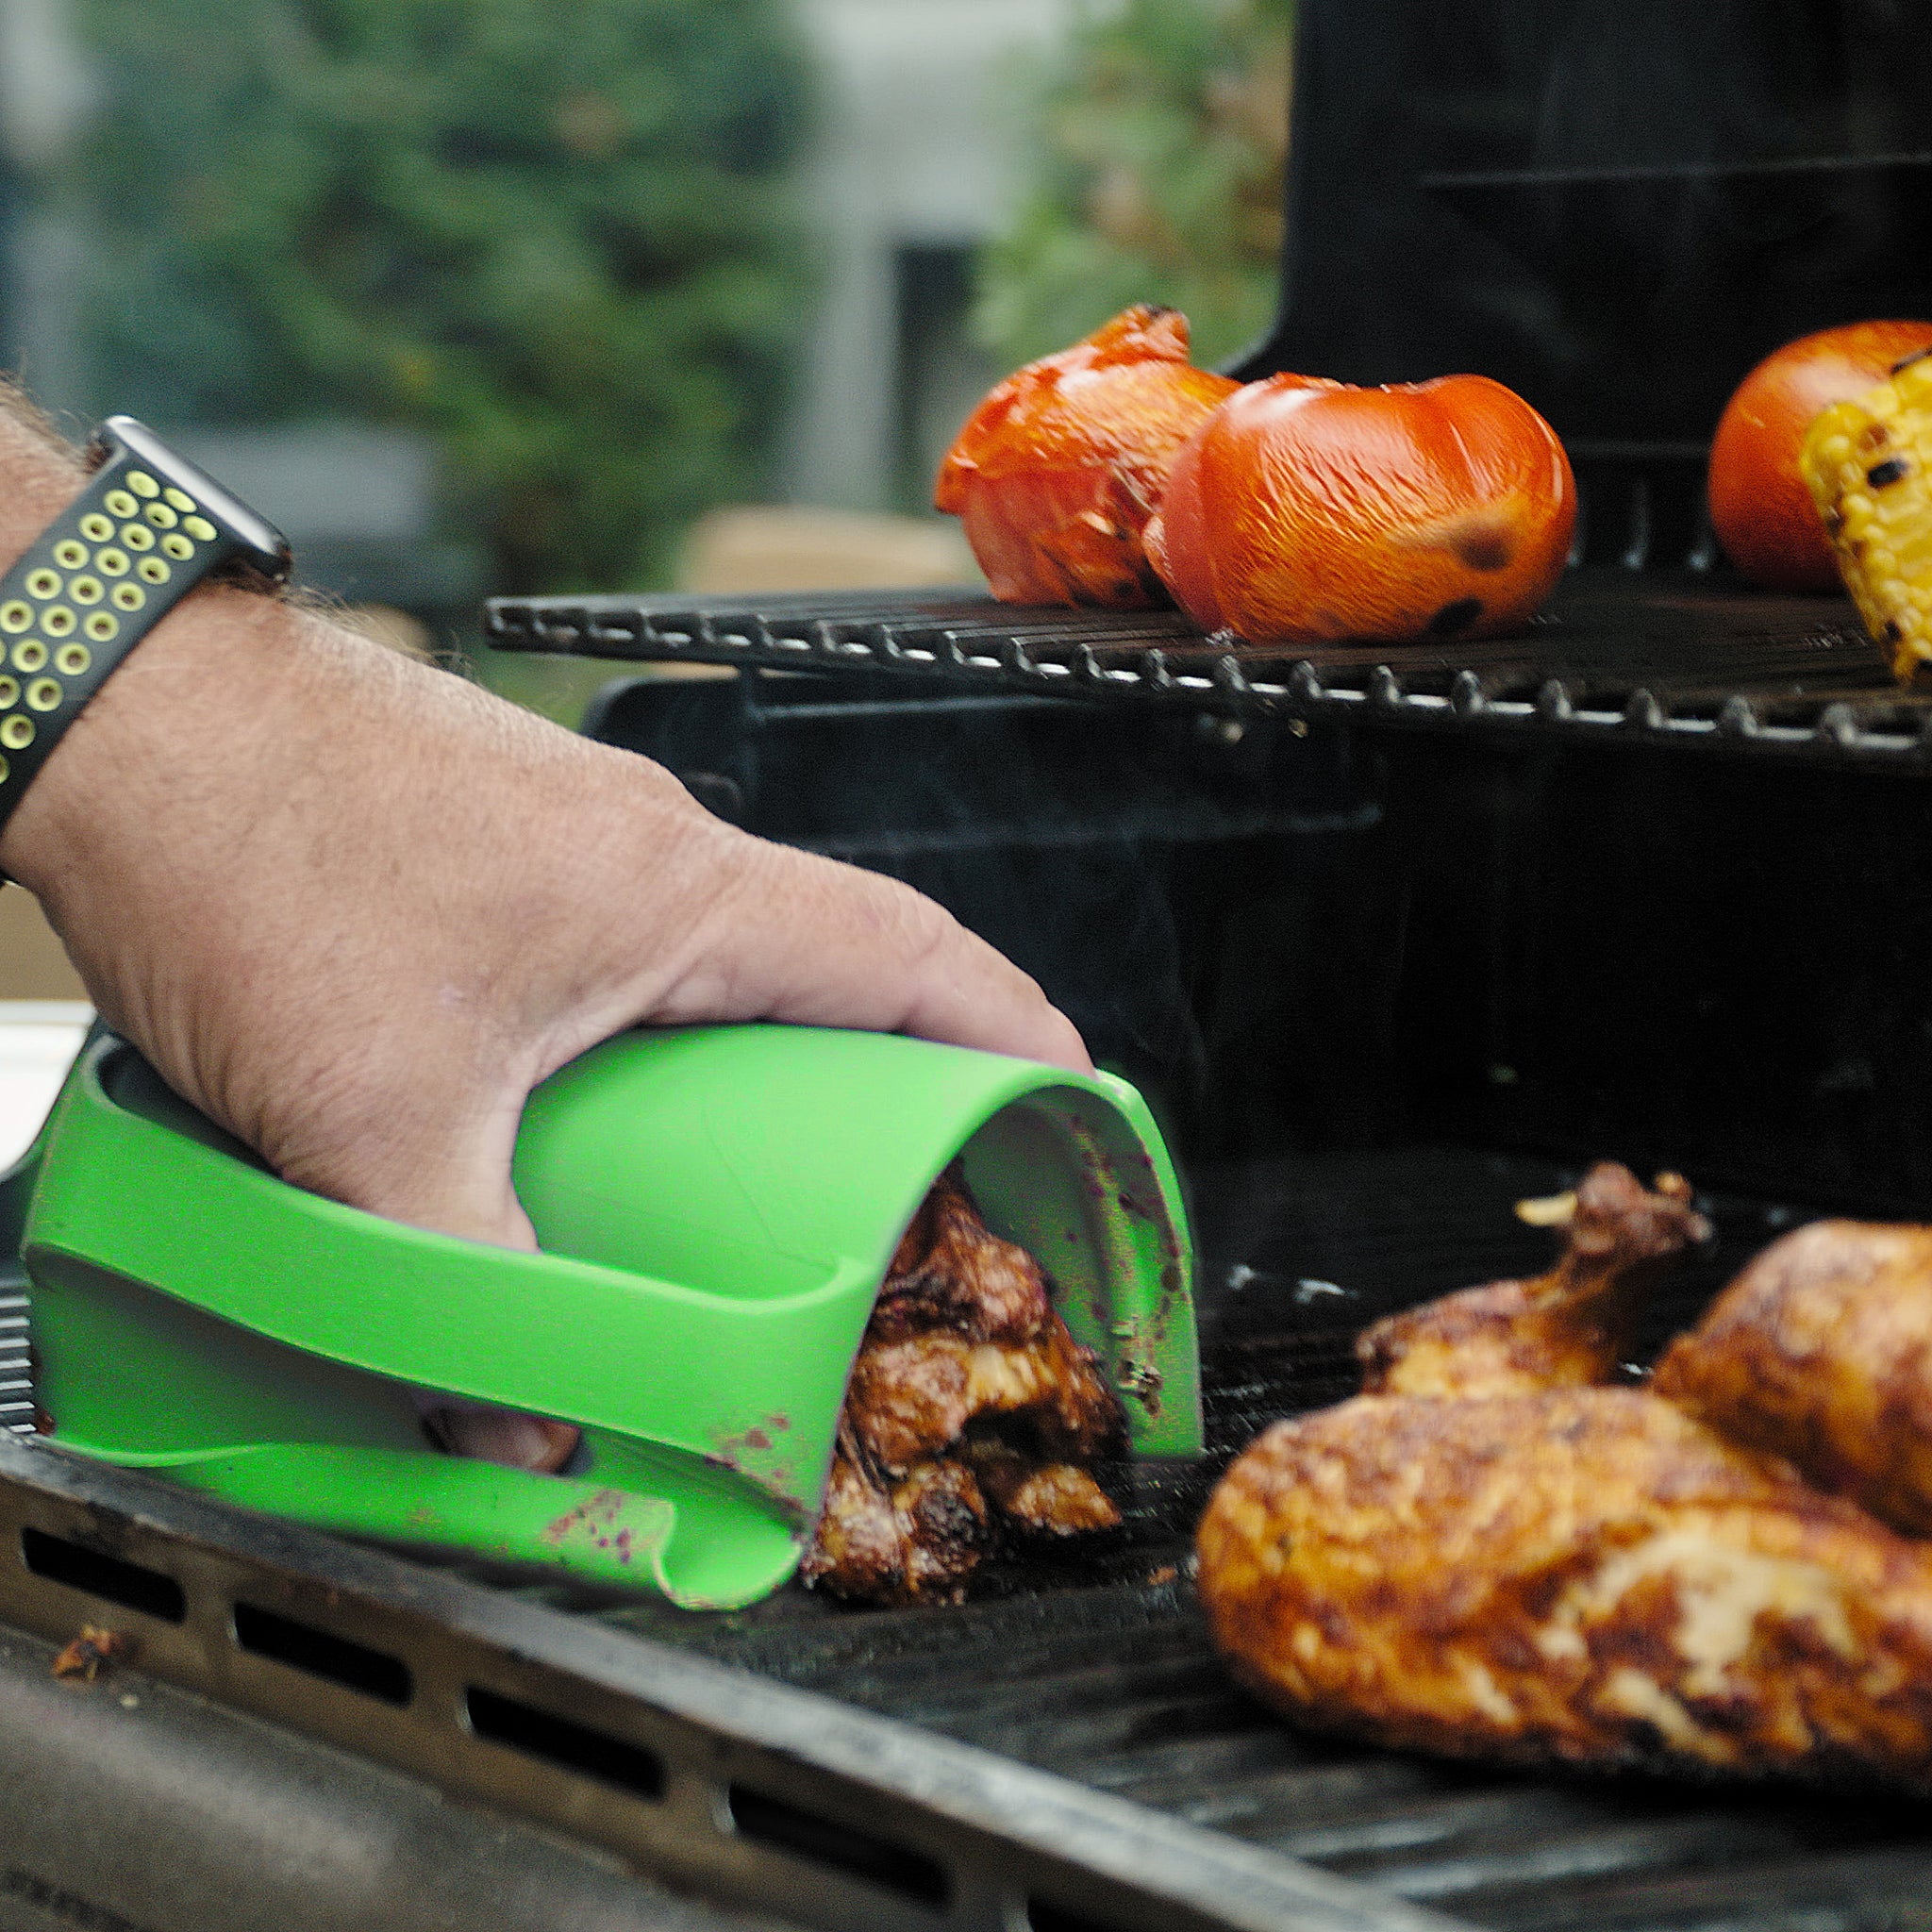 BBQ Season is in full swing! Is your grill station ready for the 4th of July BBQ party?